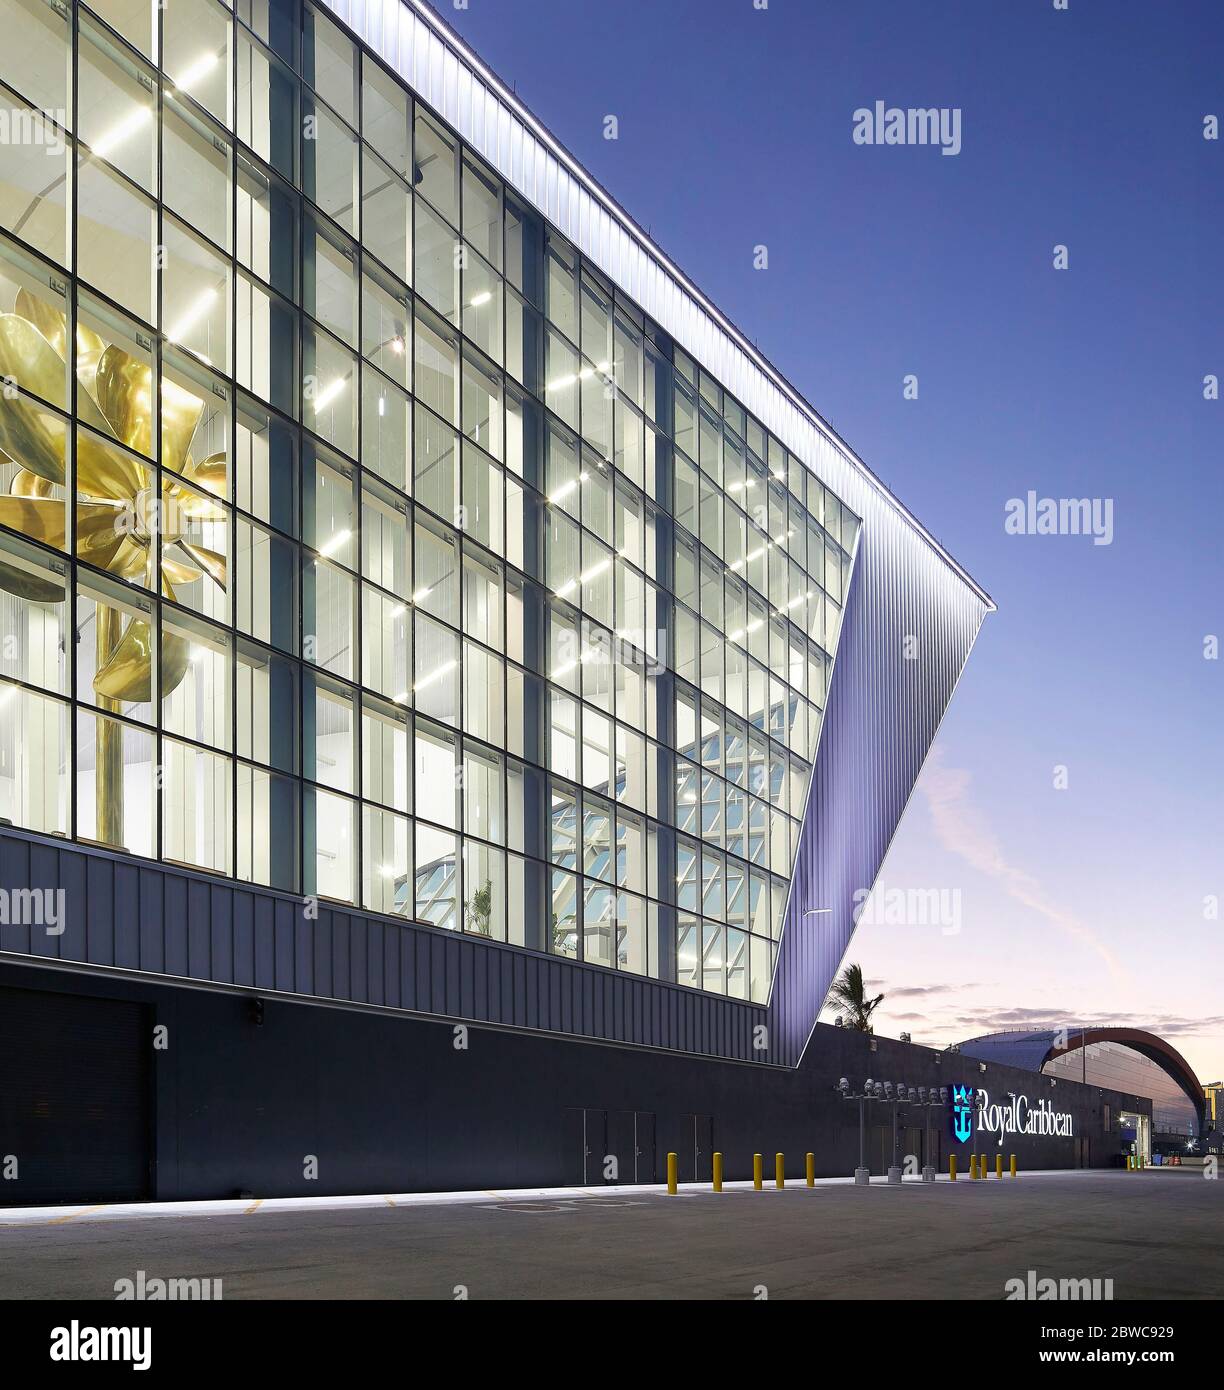 Exterior facade, lit up at sunset with view of sculptural propellor artwork inside. Royal Caribbean Miami Cruise Terminal, Miami, United States. Archi Stock Photo